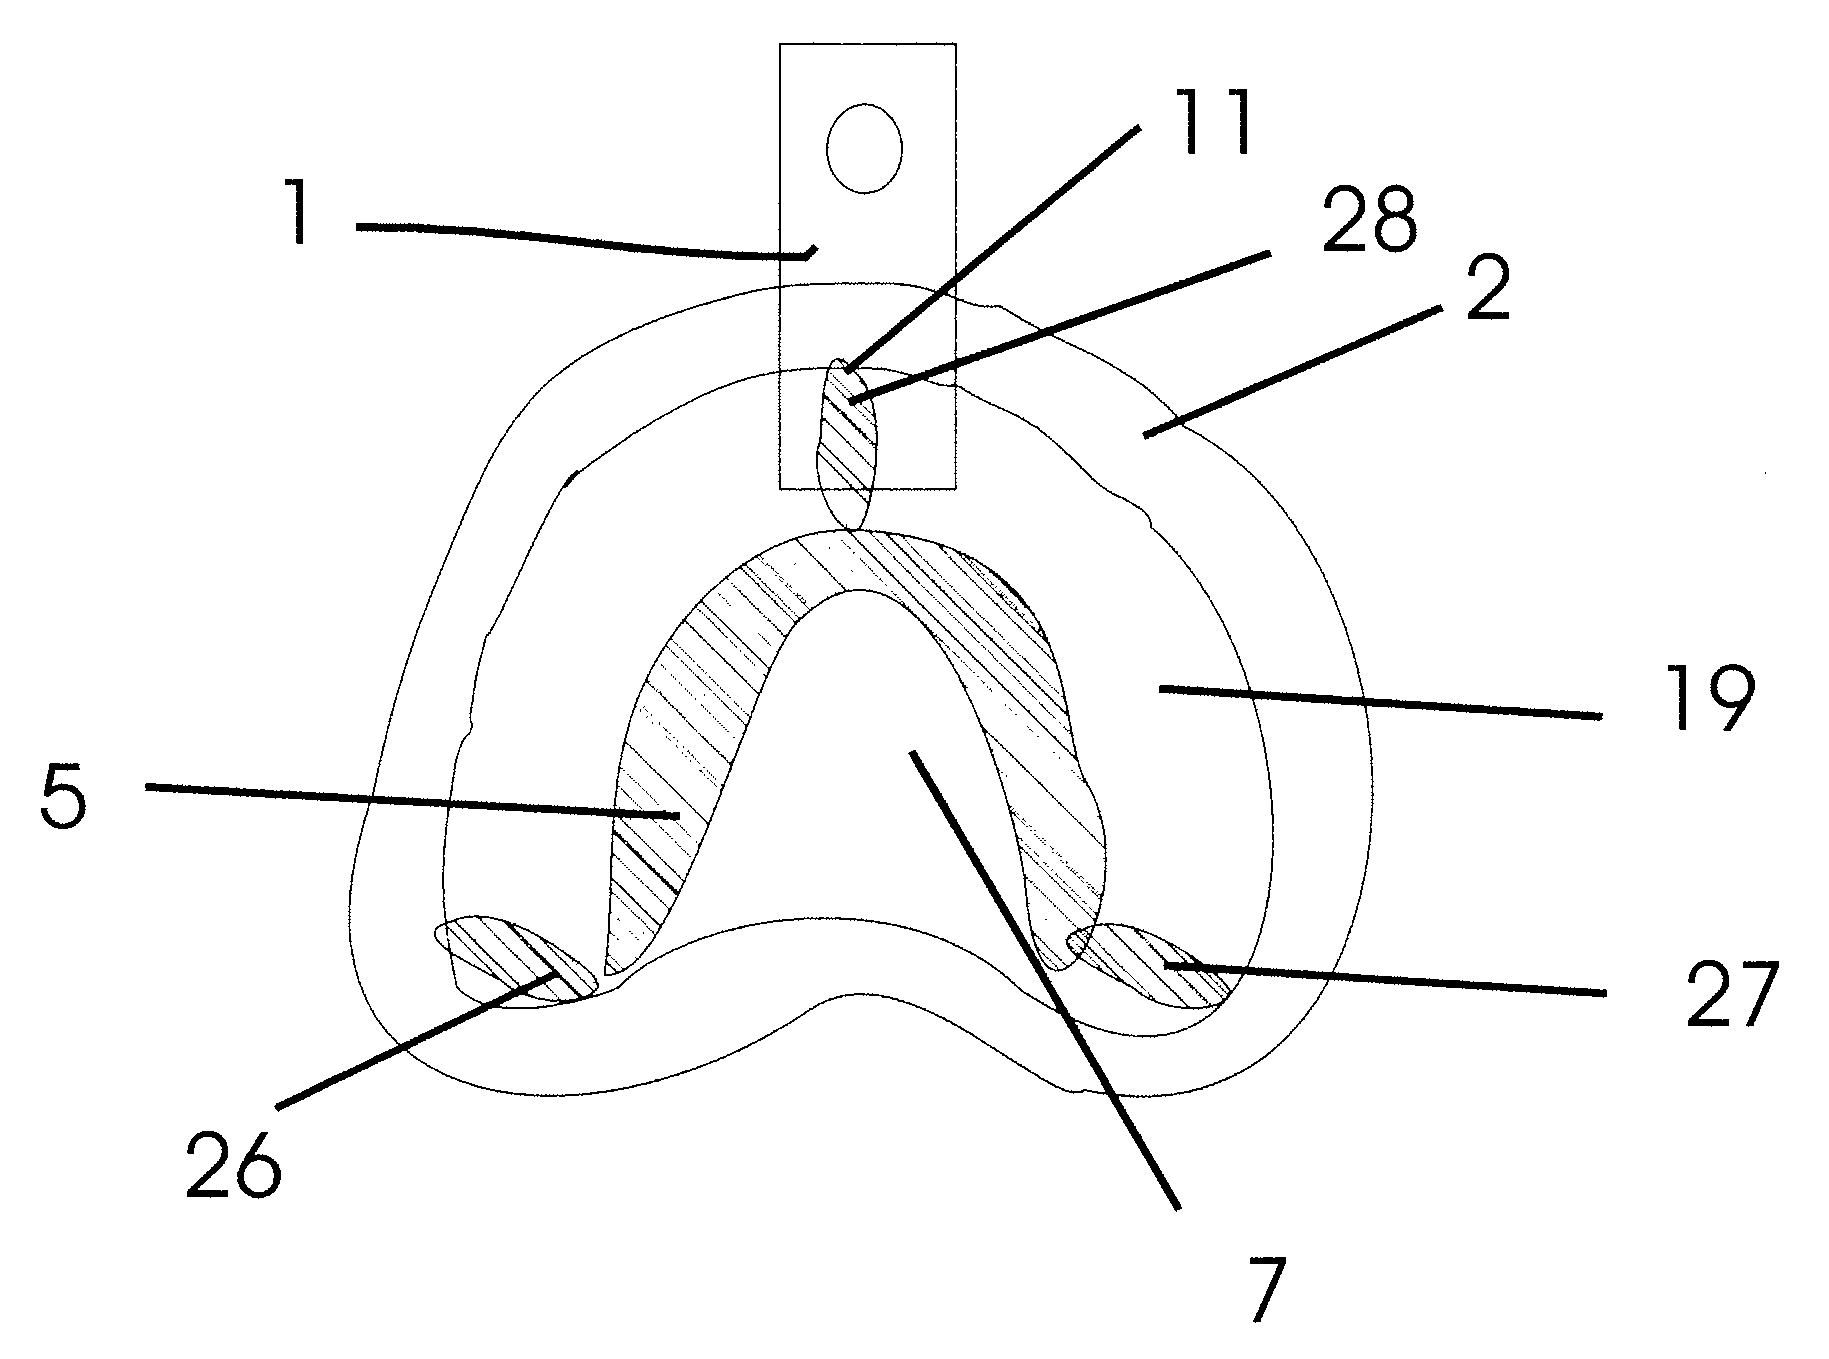 No Distortion Impression Tray and Method of Use